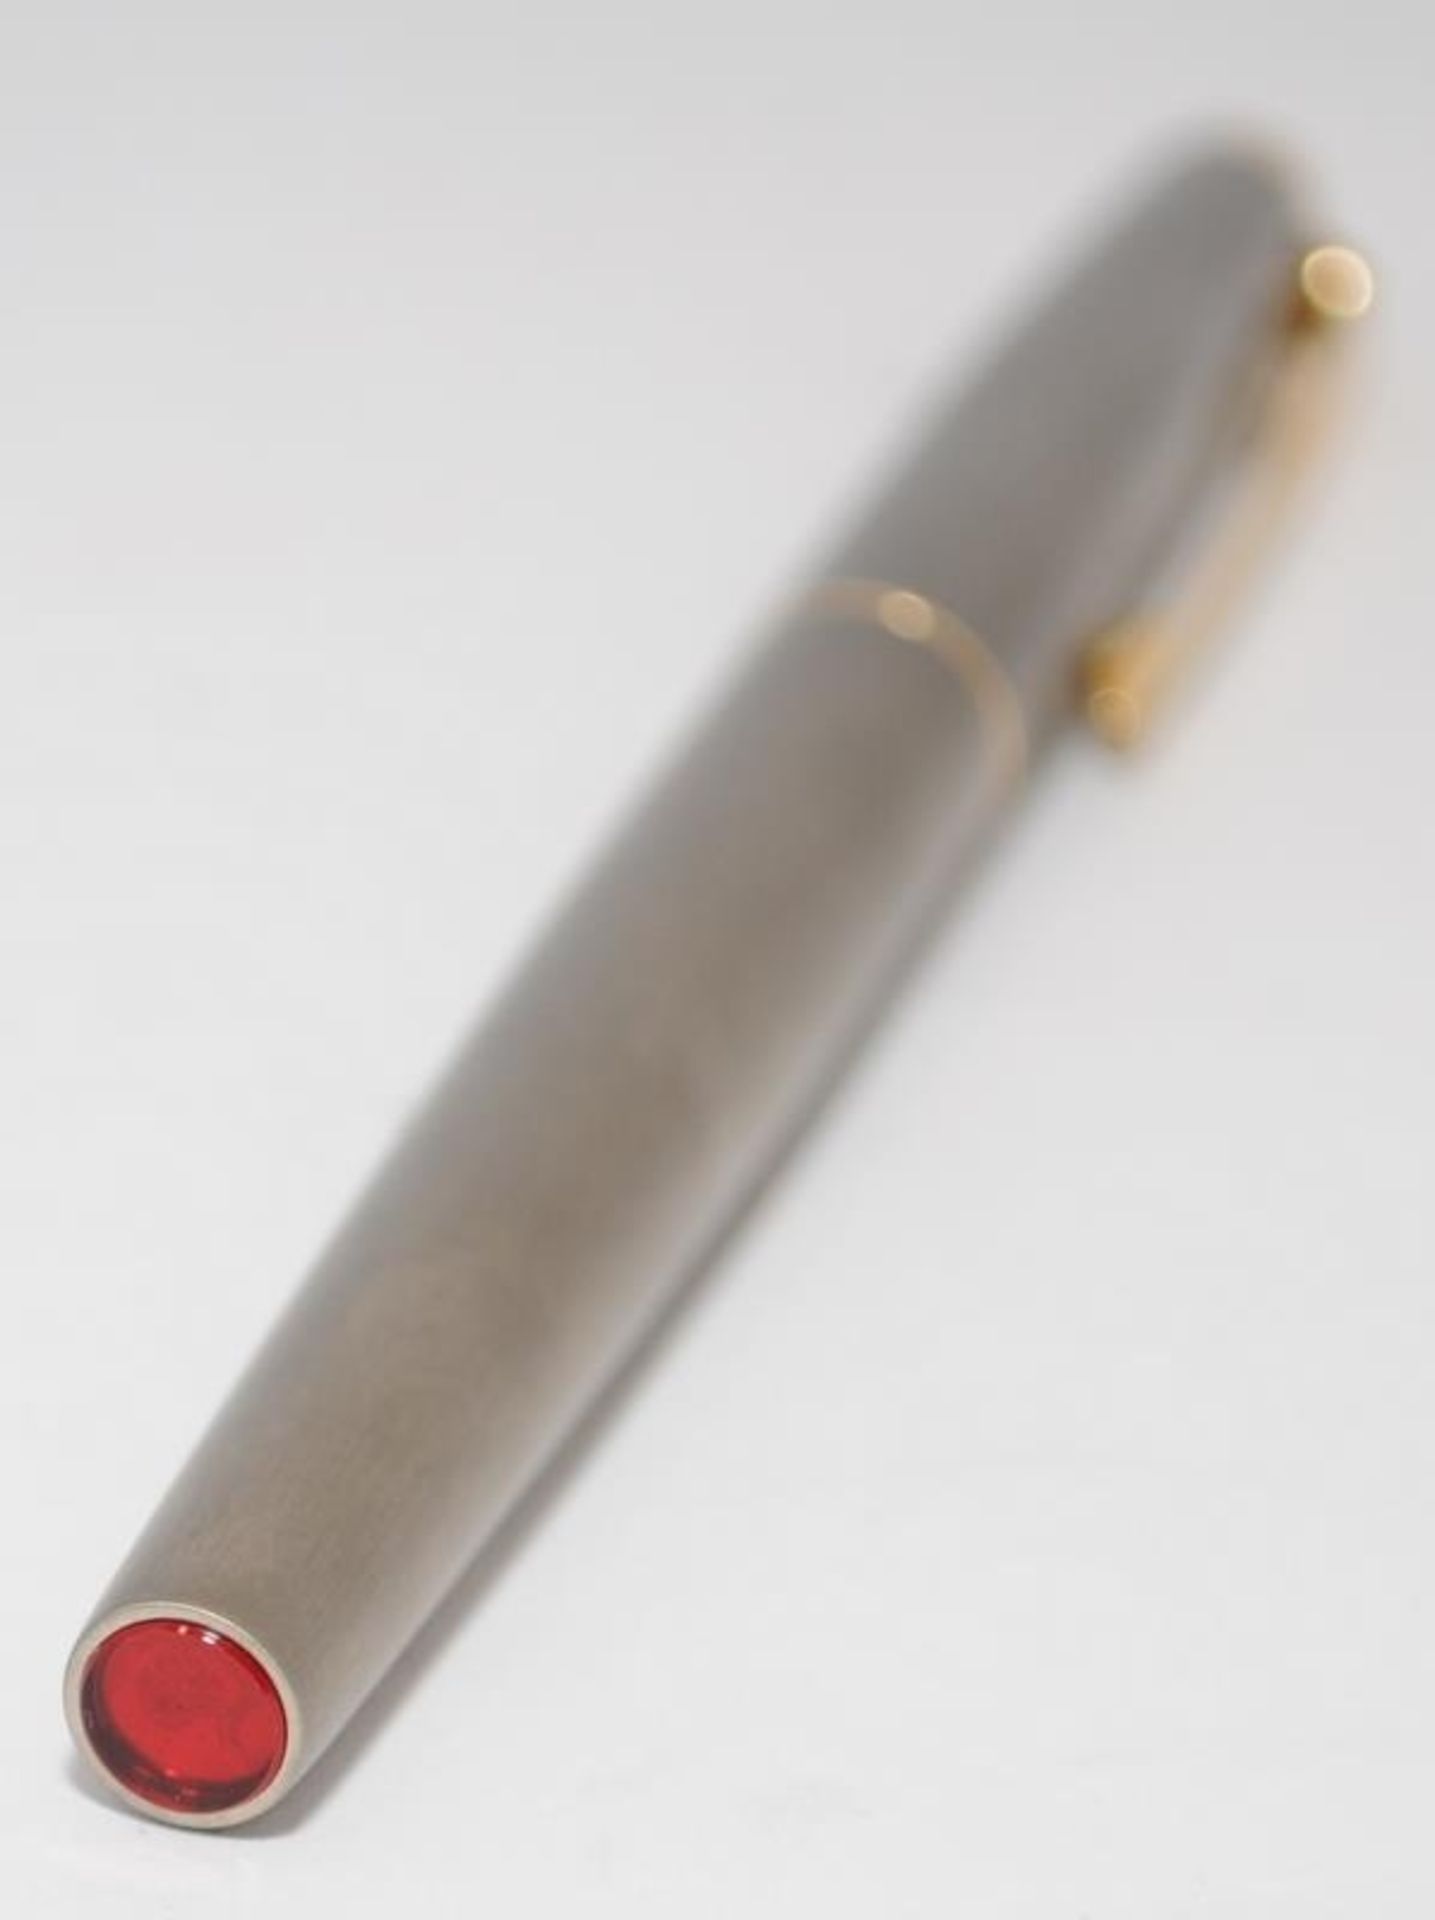 Rare Parker T1 titanium, made to celebrate the first moon landings. Near mint condition. Ref. 183 - Image 4 of 7